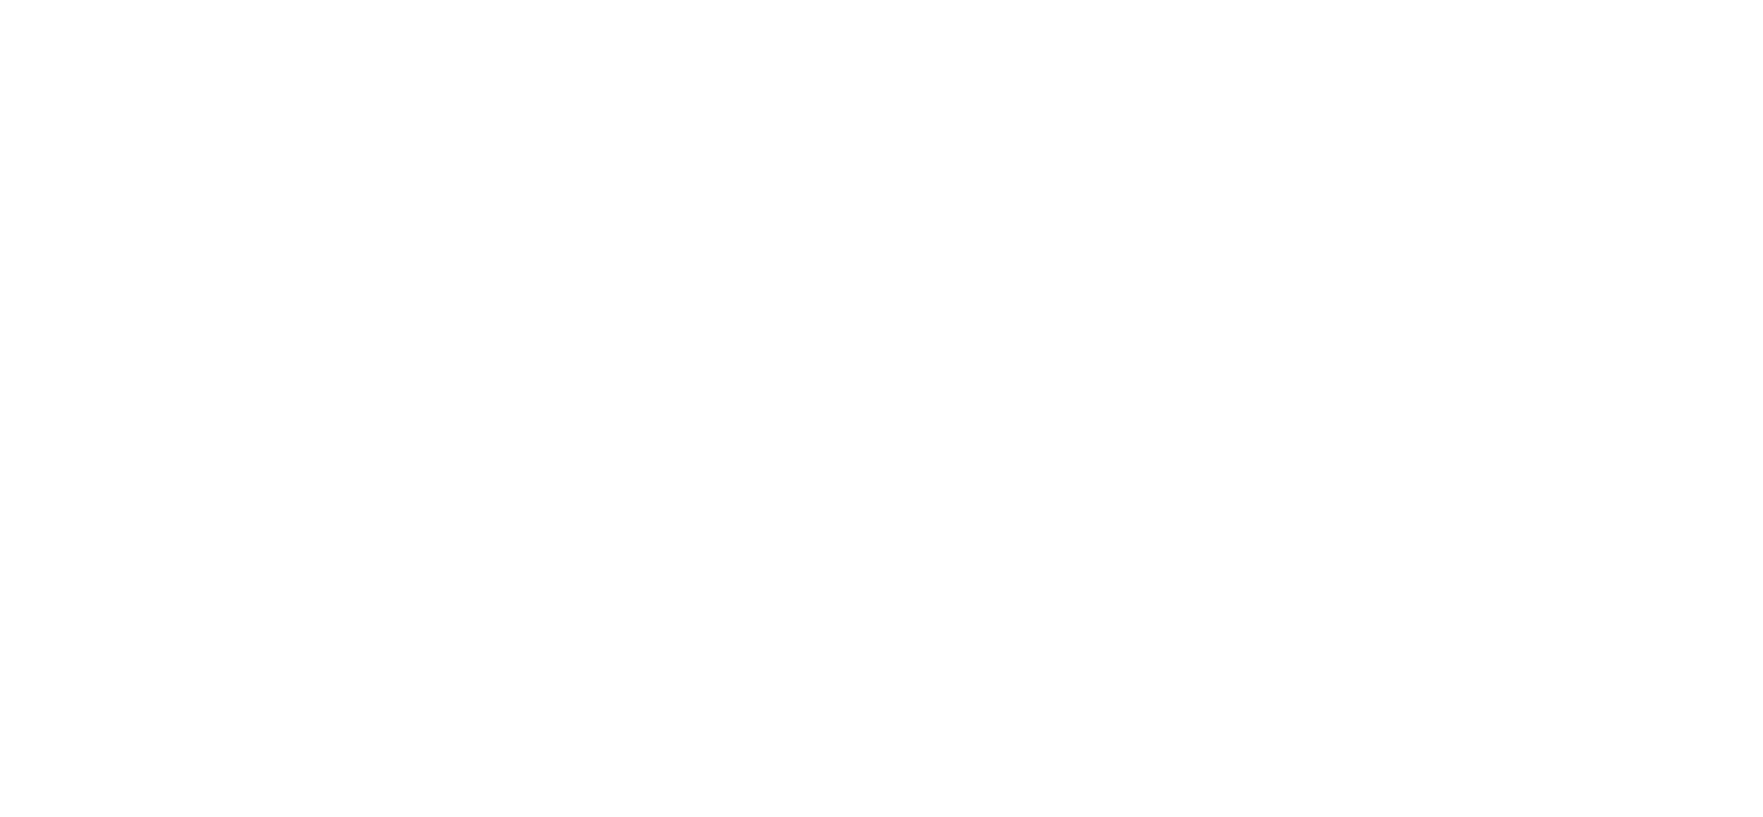 A Dickens of a Holiday! logo